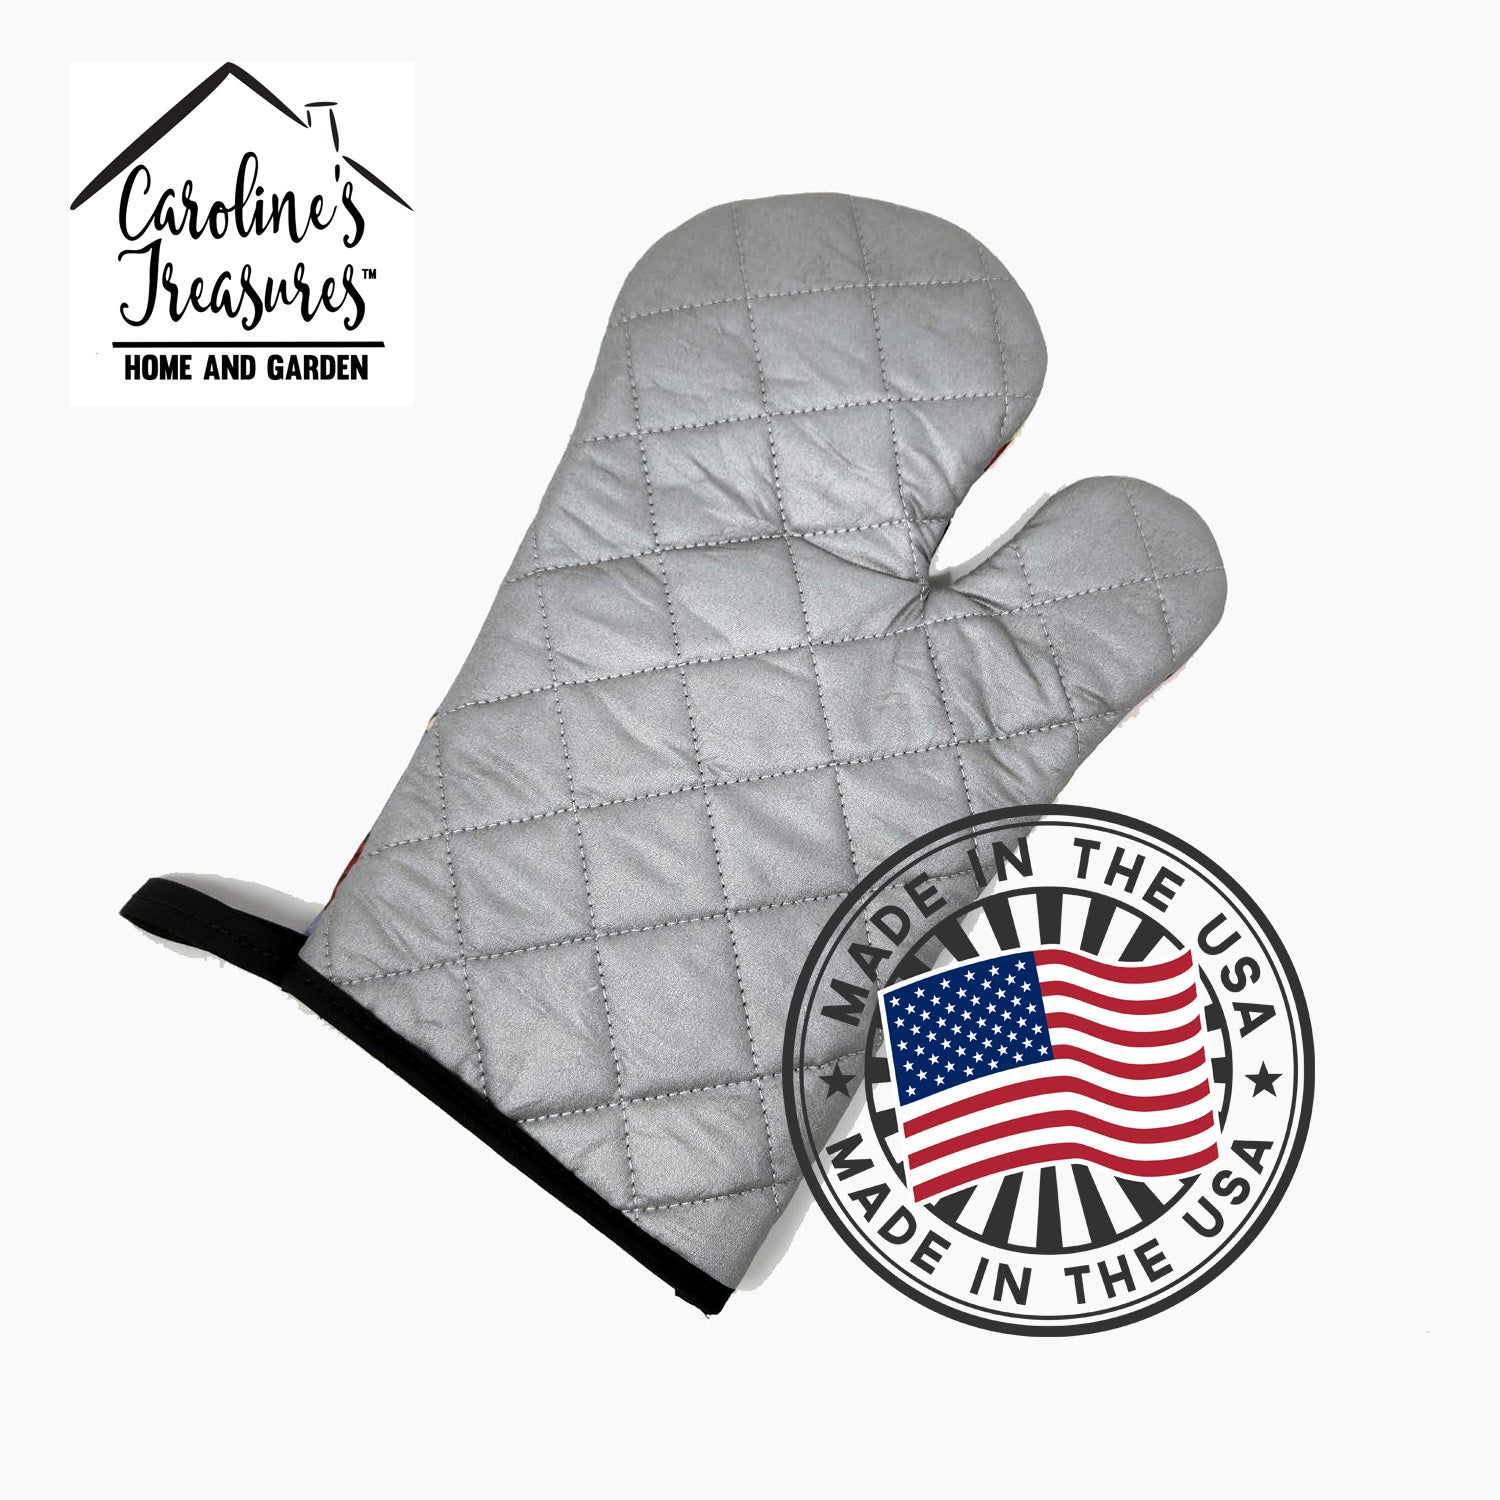 Lady with her Norwegian Elkhound Oven Mitt SS8154OVMT